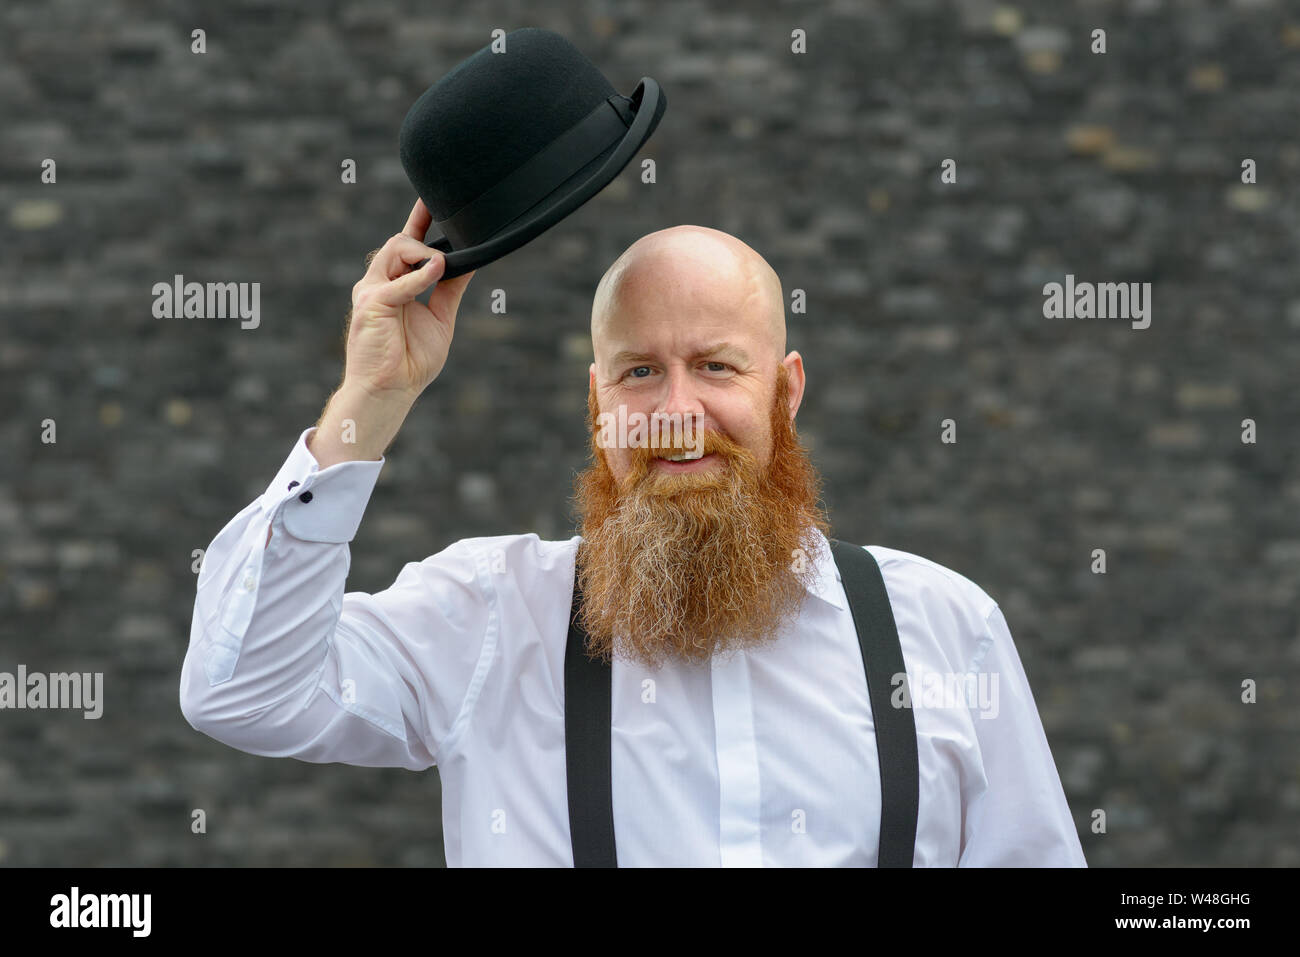 Polite bald bearded man doffing his bowler hat in greeting with a friendly welcoming smile over a grey background Stock Photo